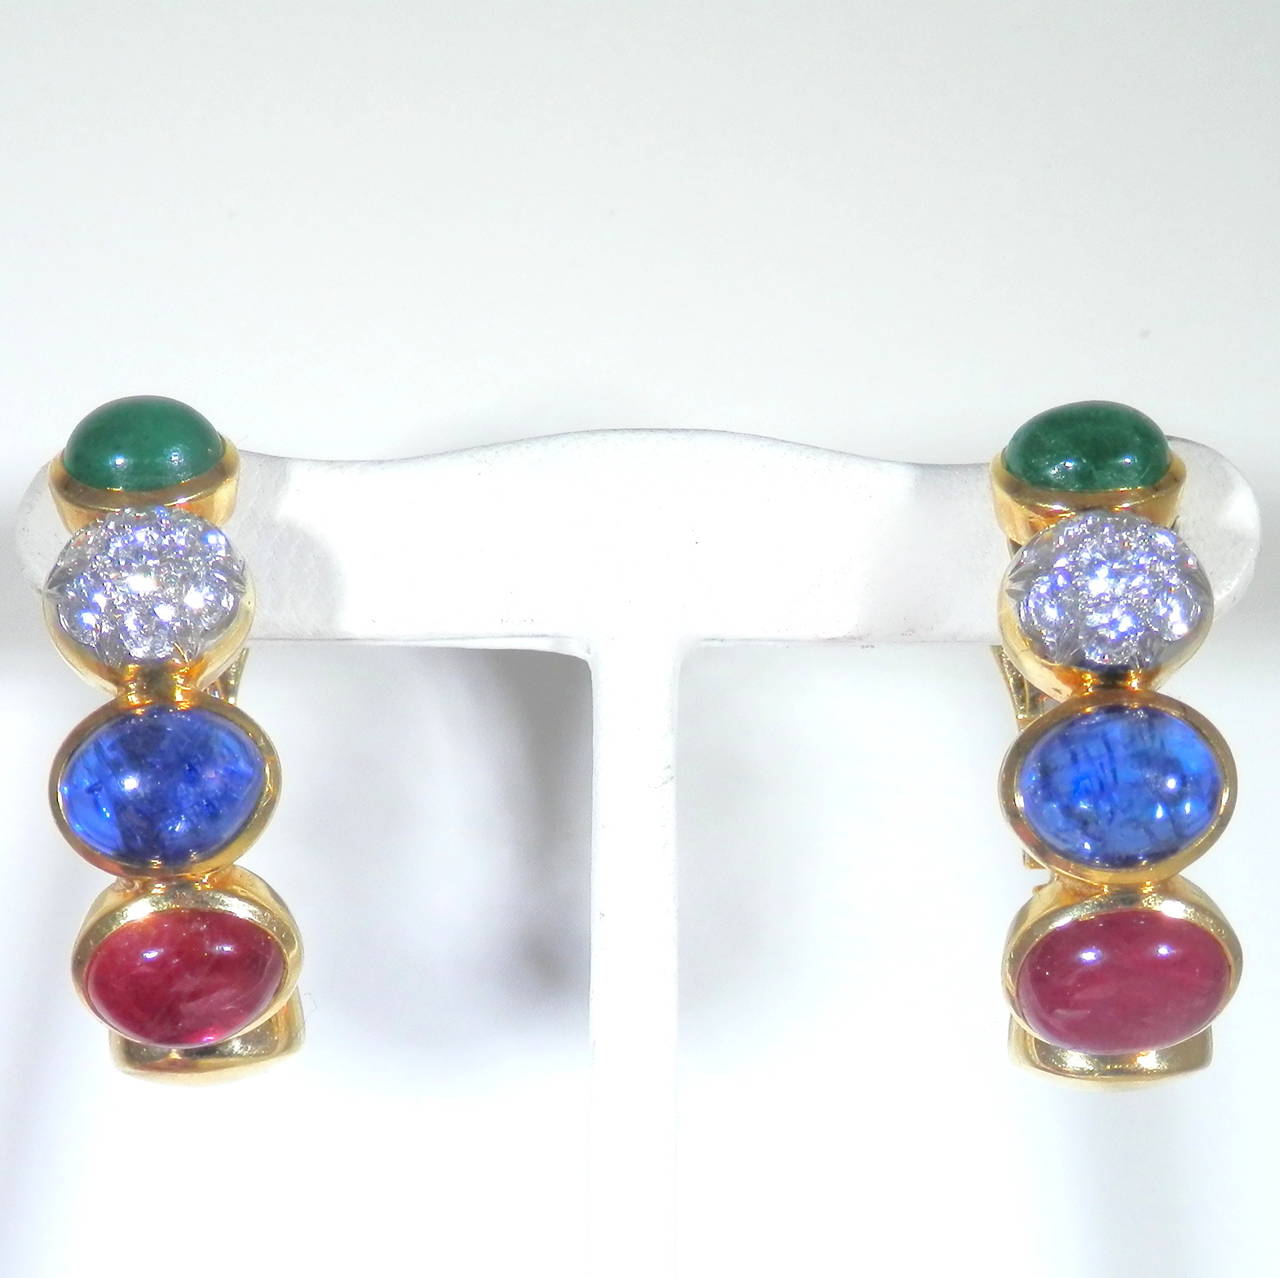 With 2 oval cab emeralds weighing approx. 2 cts., 2 oval cab sapphires weighing approx. 5 cts., 2 oval cab rubies weighing 6 cts., and 14 diamonds in a cluster weighing 1.20 cts., these earrings are 4 bright colors and are classic examples of David